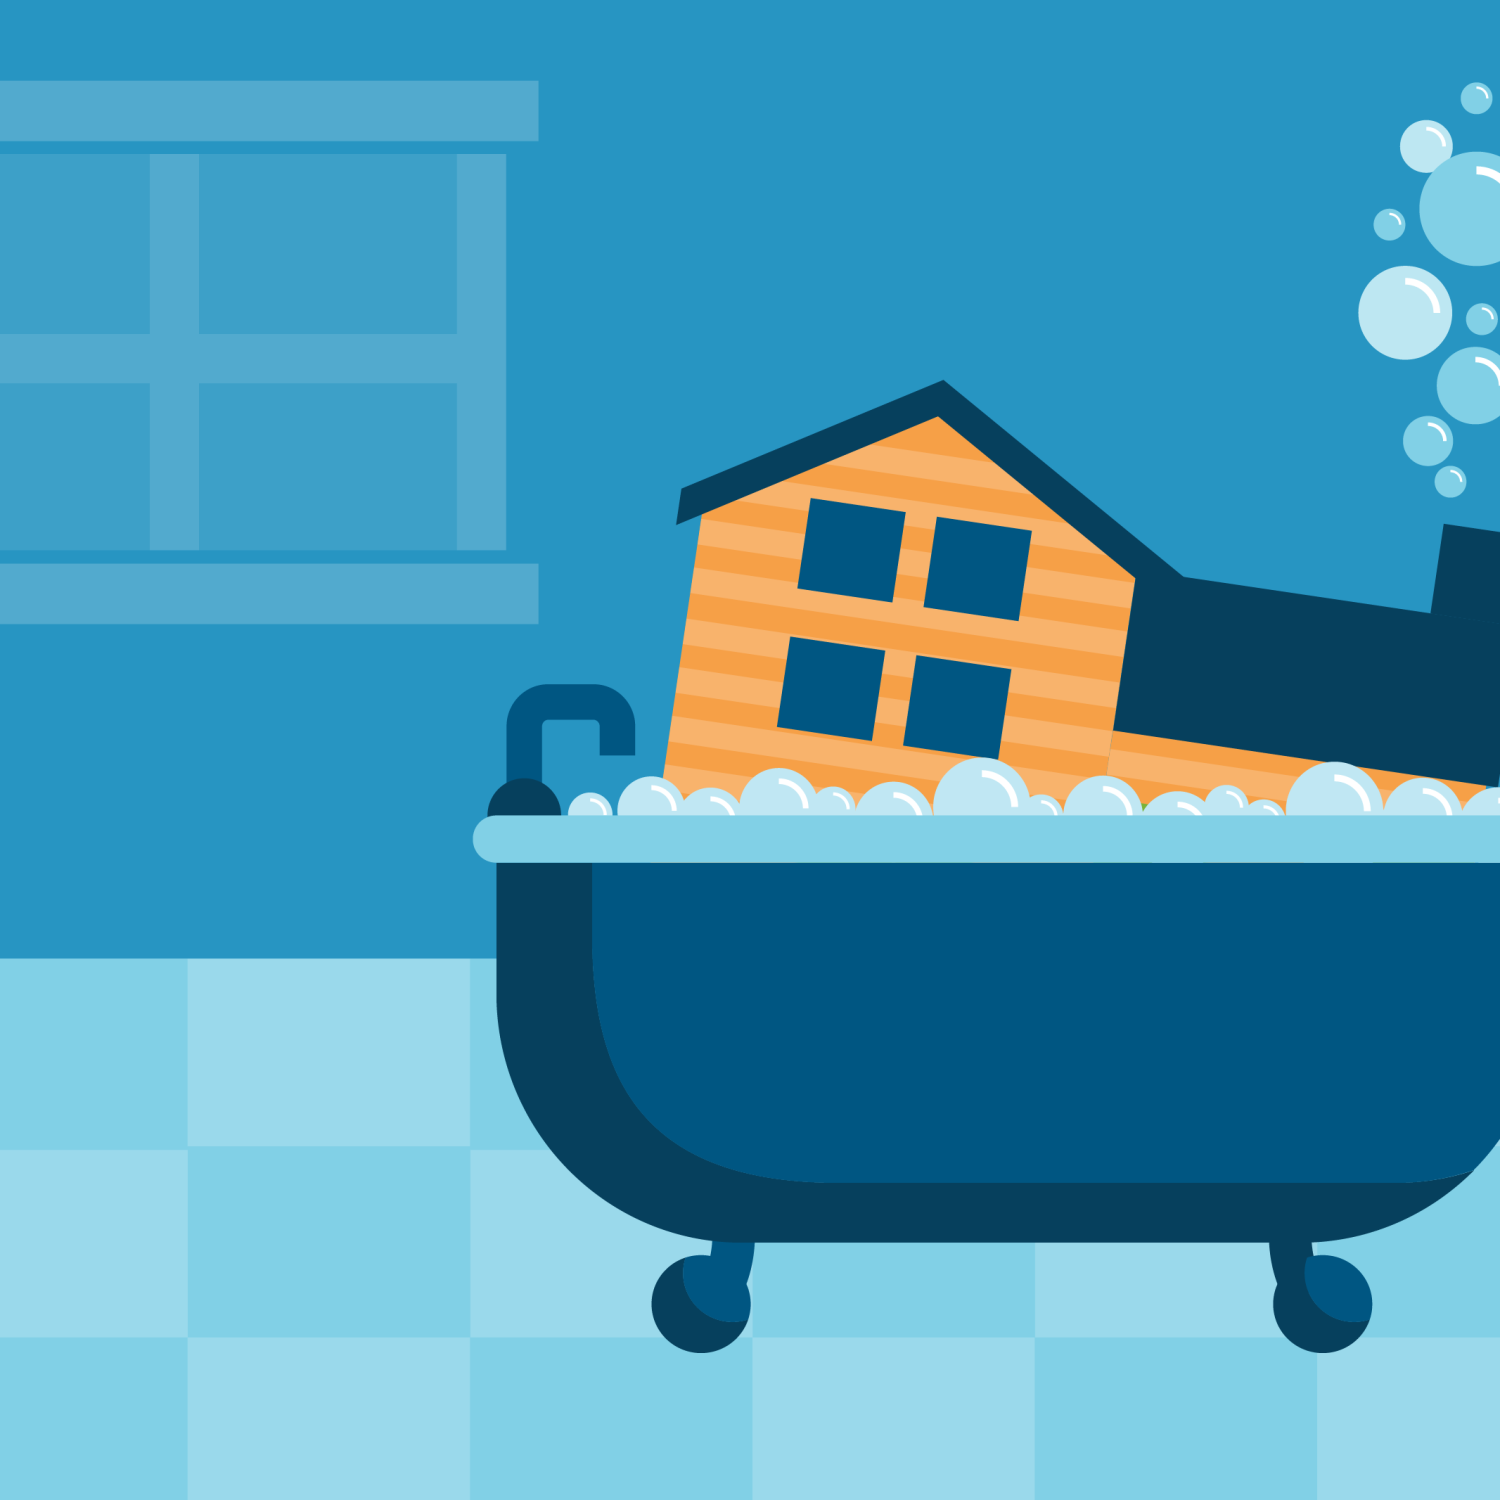 Graphic of a home in a bathtub, illustrating the idea of a clean home.